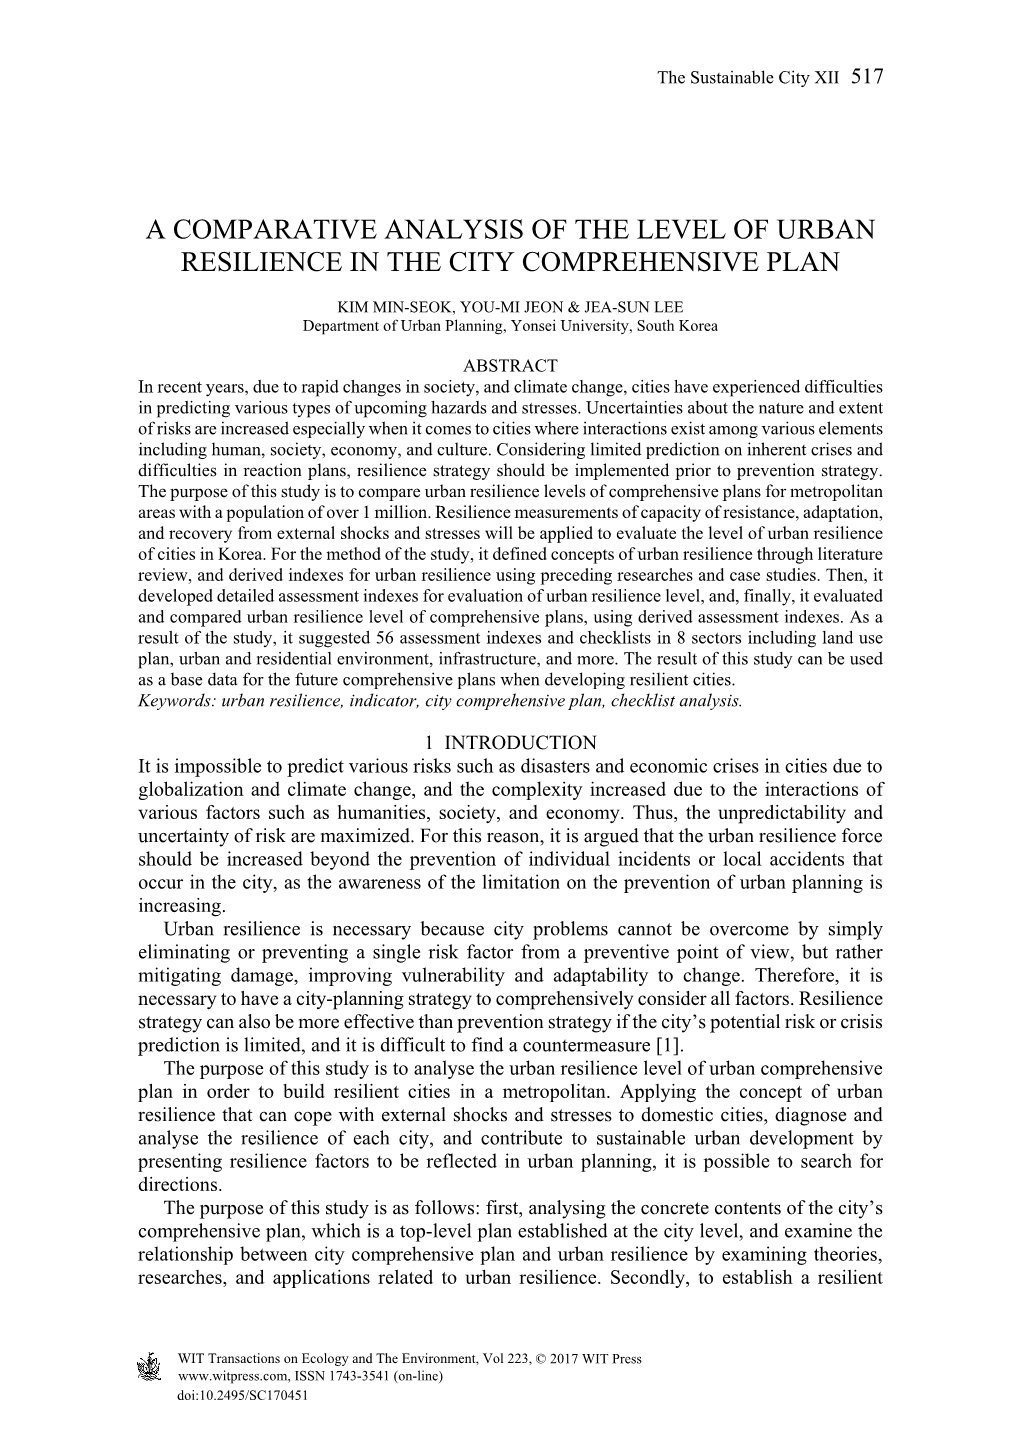 A Comparative Analysis of the Level of Urban Resilience in the City Comprehensive Plan